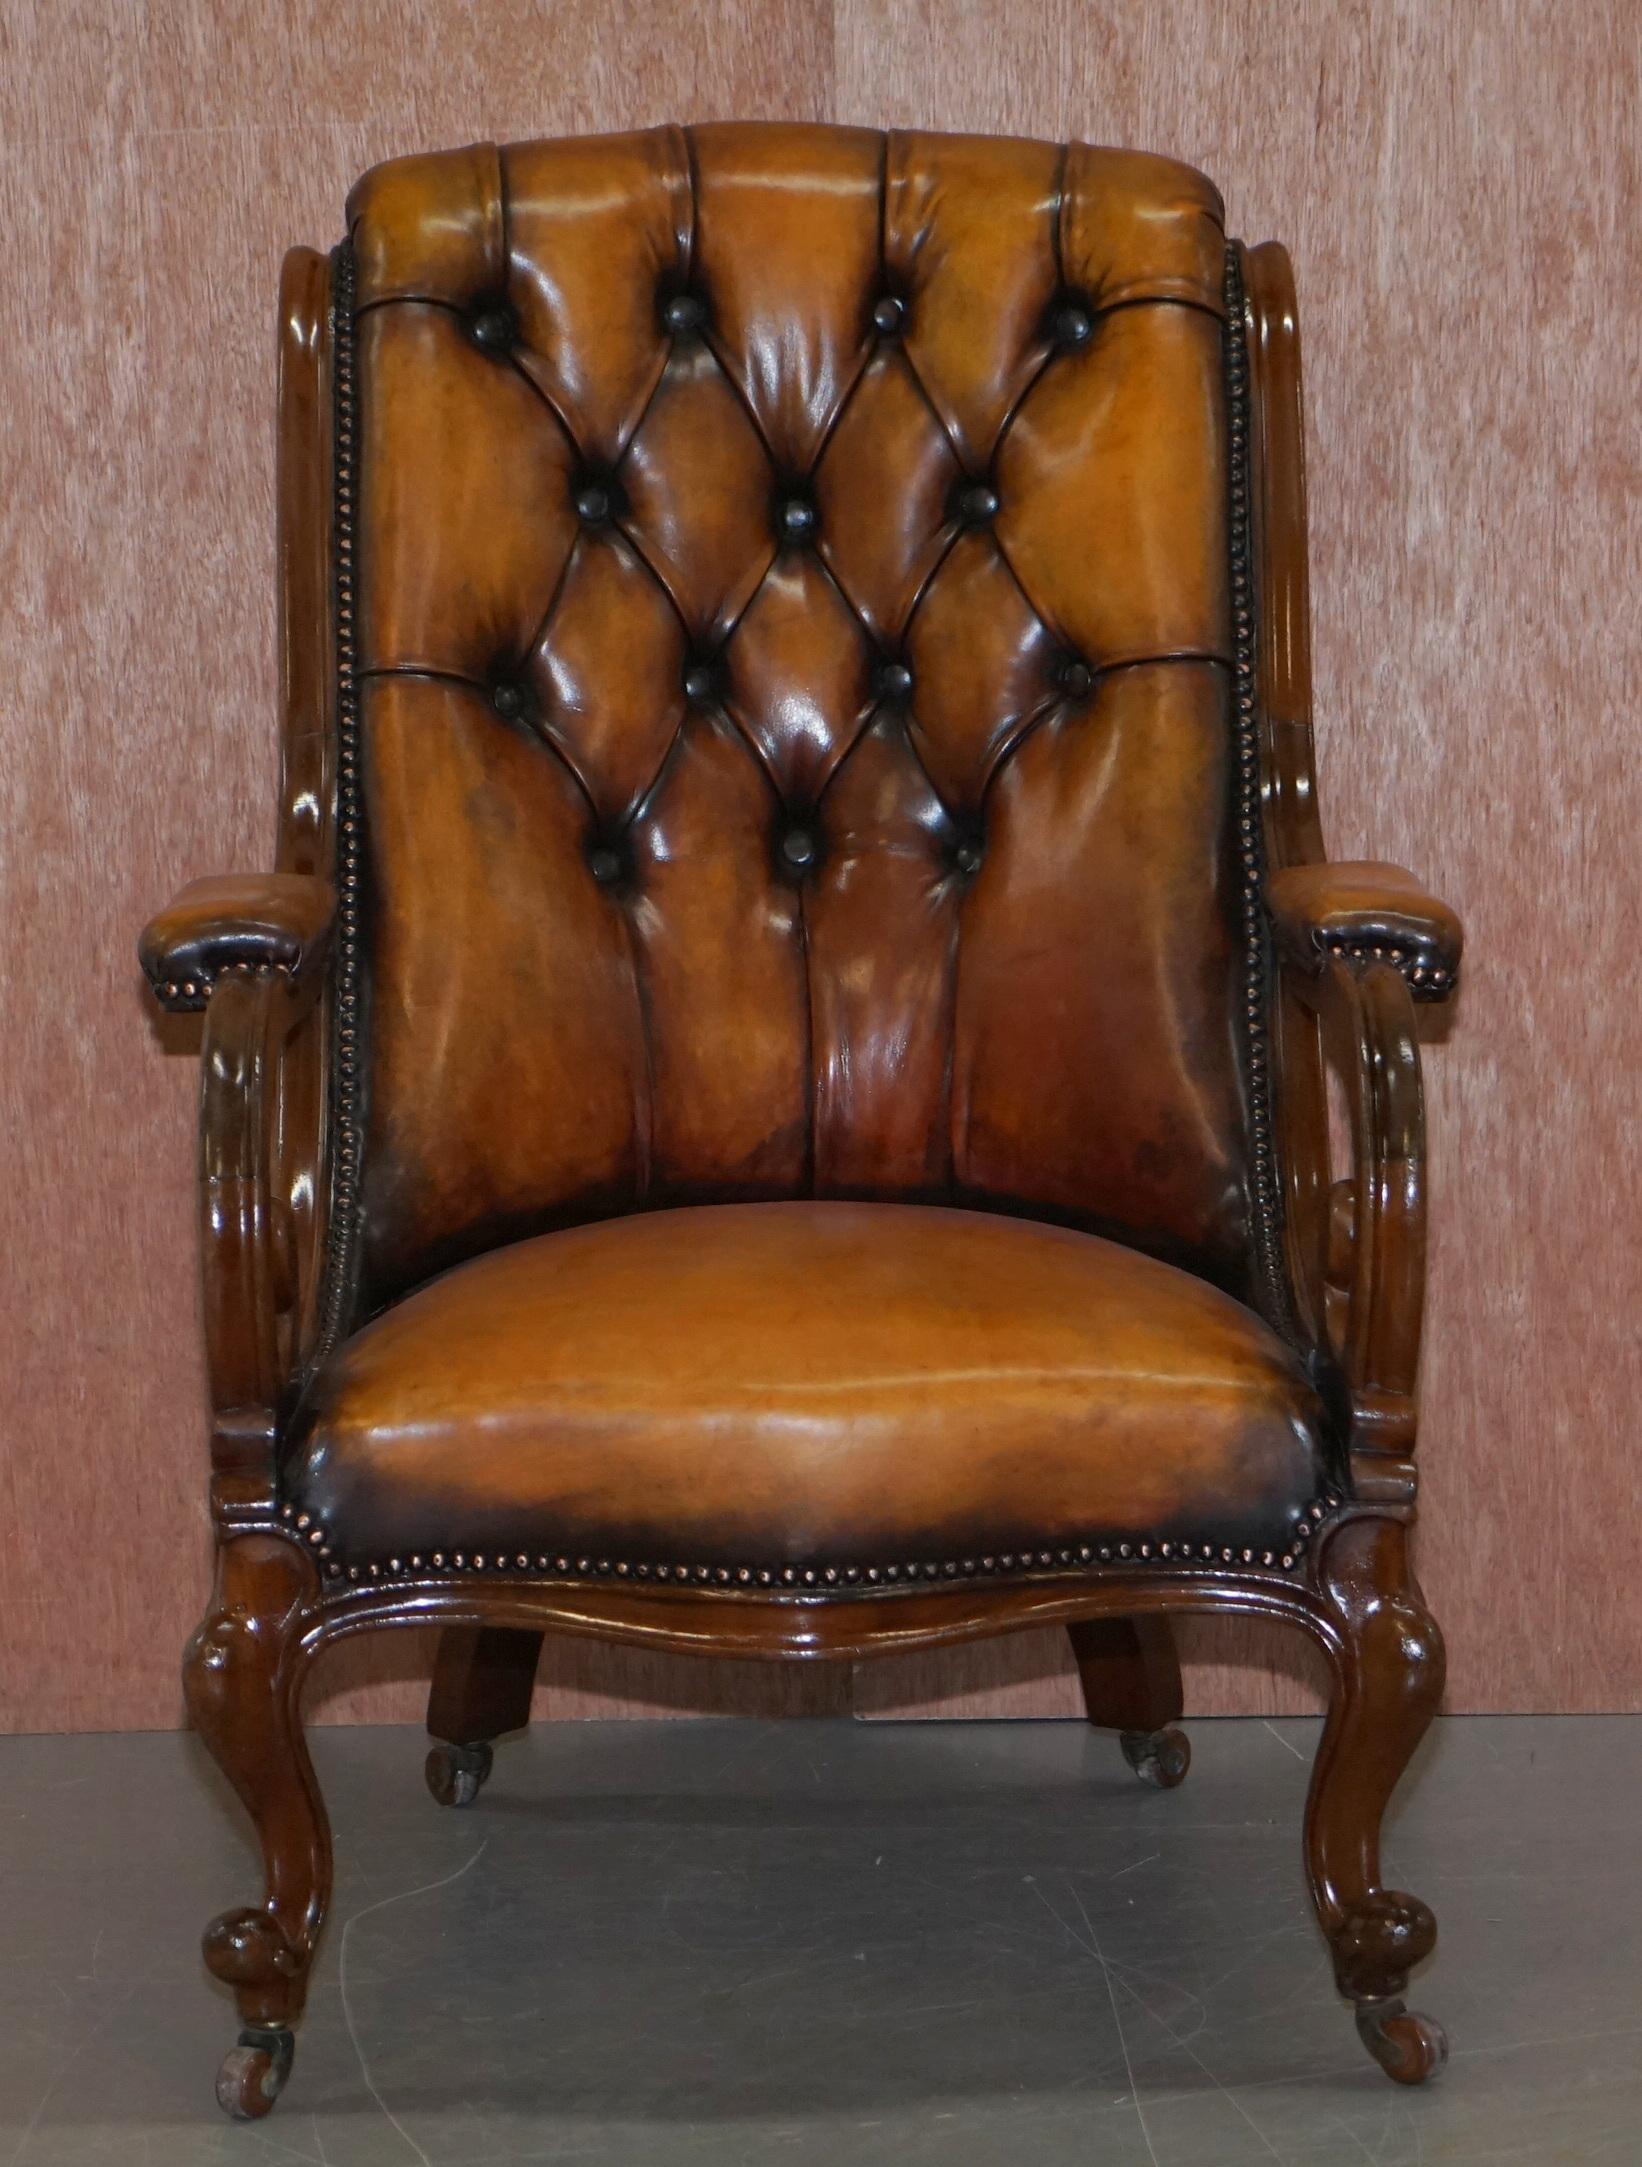 We are delighted to offer for sale this rare fully restored circa 1840 show framed Chesterfield tufted hand dyed brown leather library reading chair

This chair is really quite exquisite, its what’s called a show frame, cabinet makers would craft